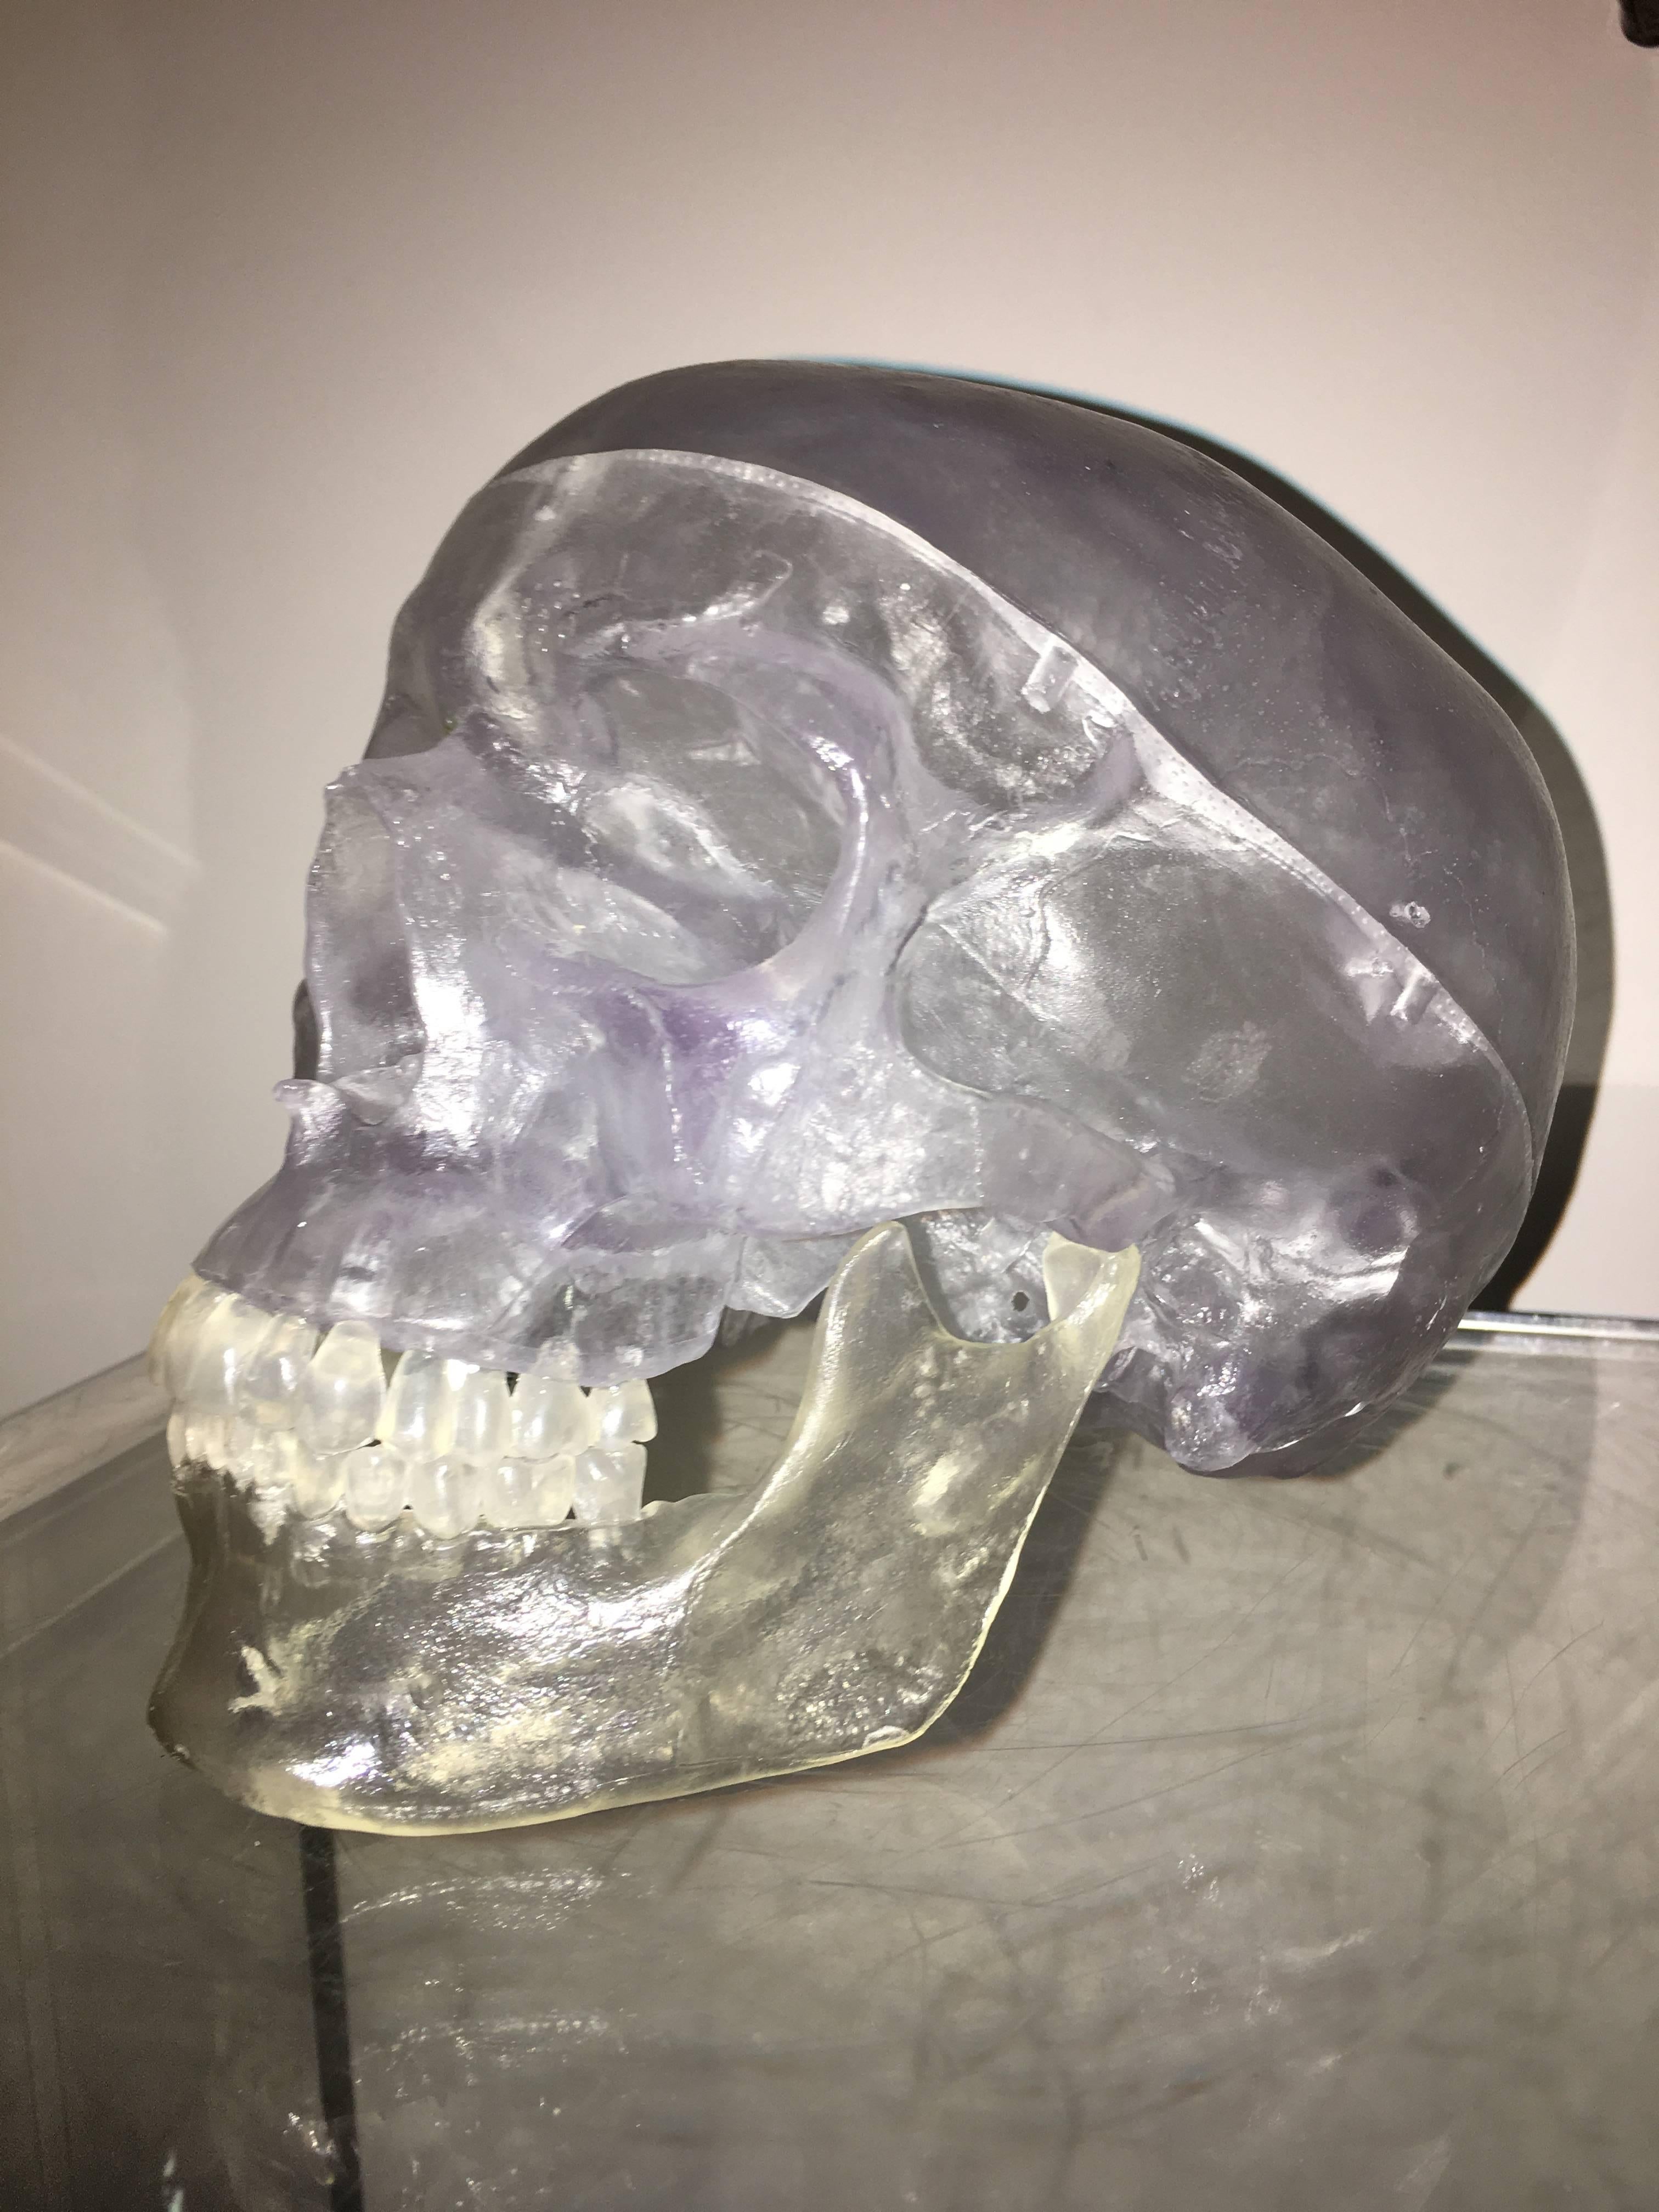 Terrific vintage acrylic skull table sculpture. This interesting piece is a full size human skull and comprised of a clear acrylic / Lucite. The mouth opens with a Hinge. Very unique piece for your desk or home.